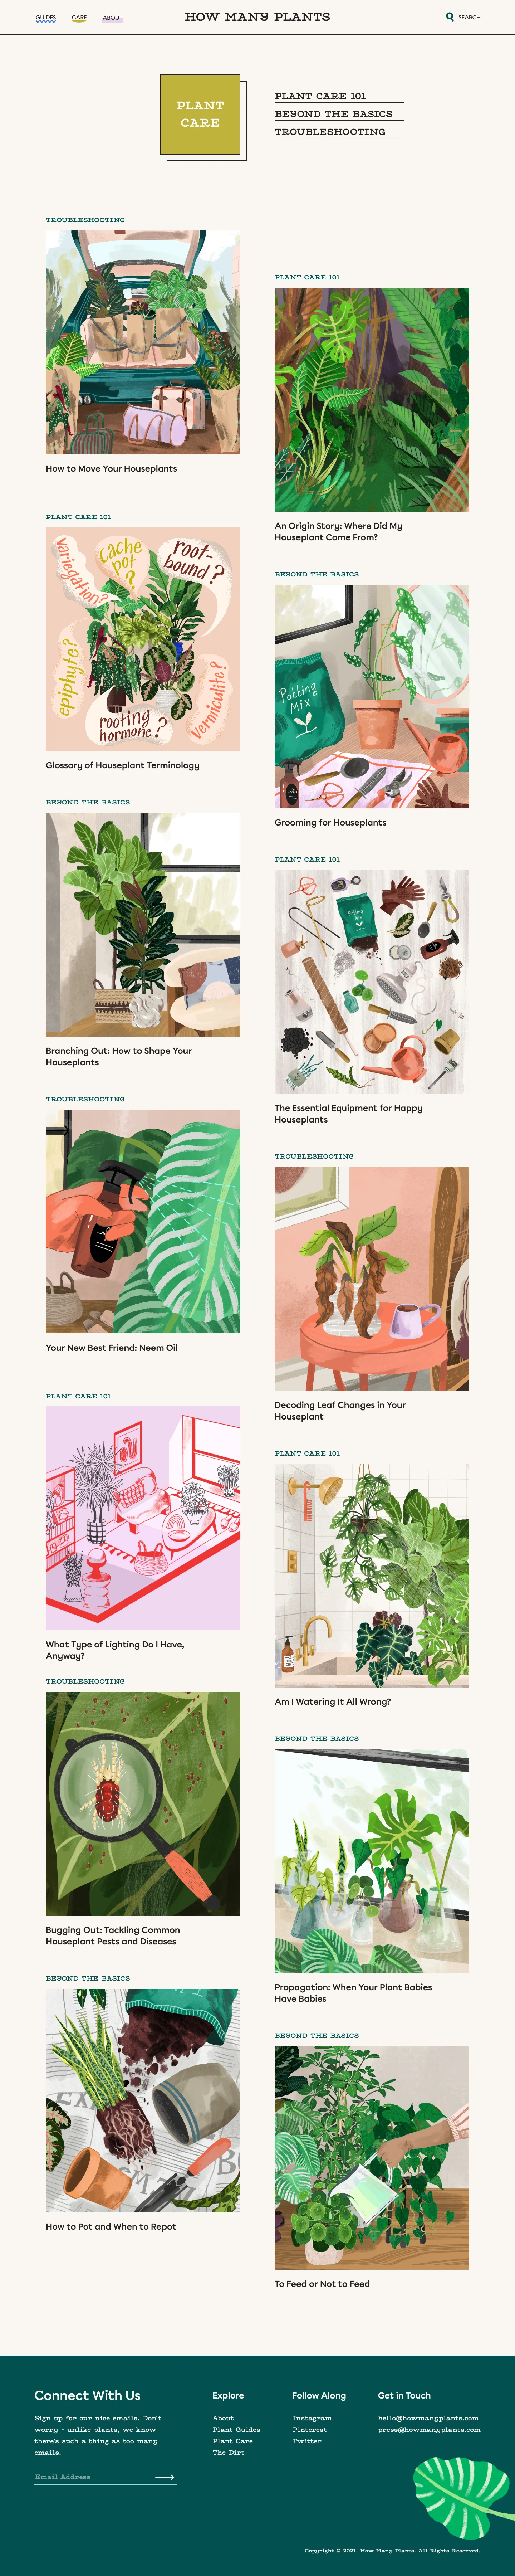 How Many Plants Landing Page Example: How Many Plants is a growing plant care resource and community for ALL plant parents, seasoned enthusiasts and first-timers alike!